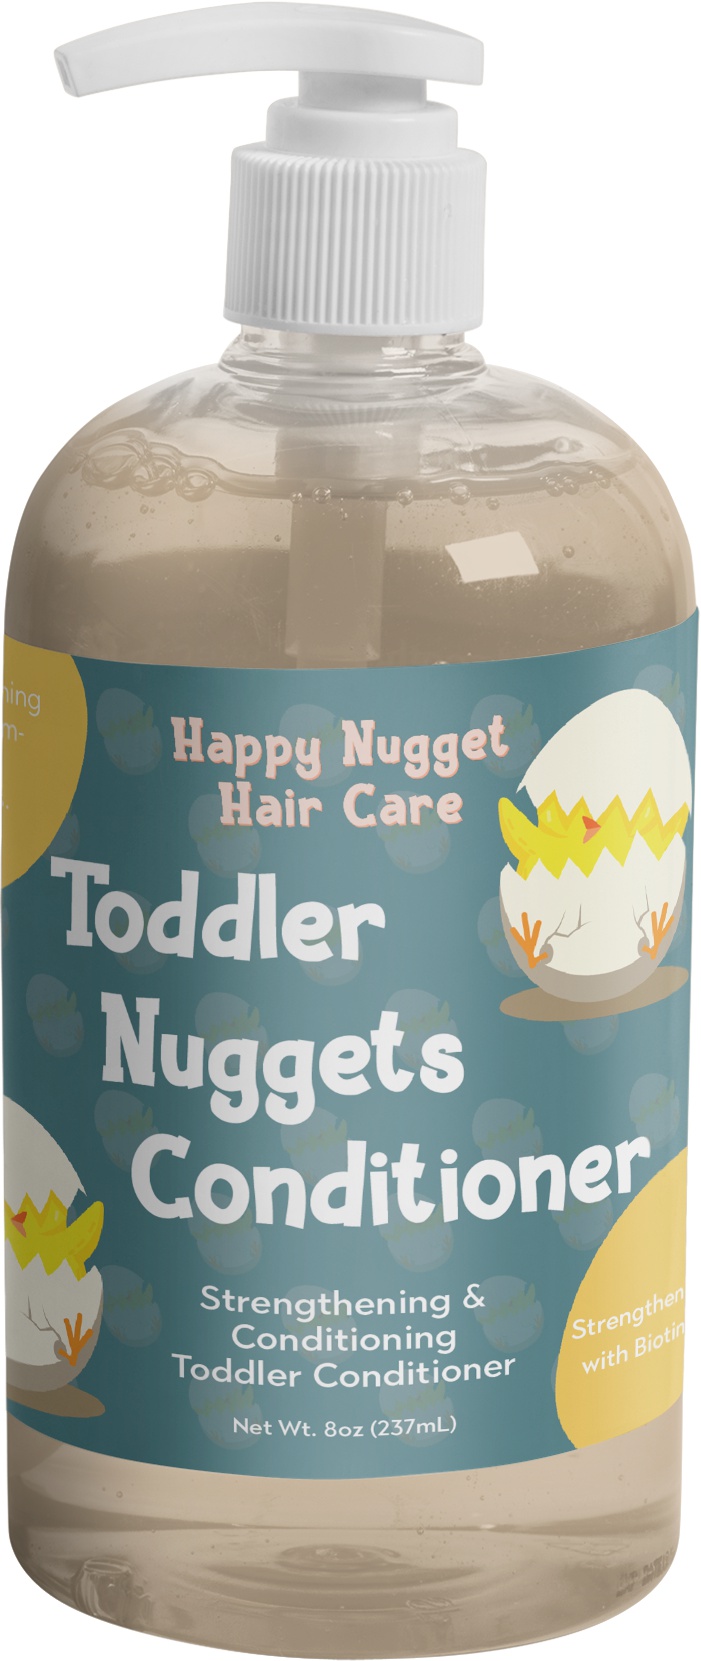 Happy Nugget Hair Care Toddler Nugget Conditioner